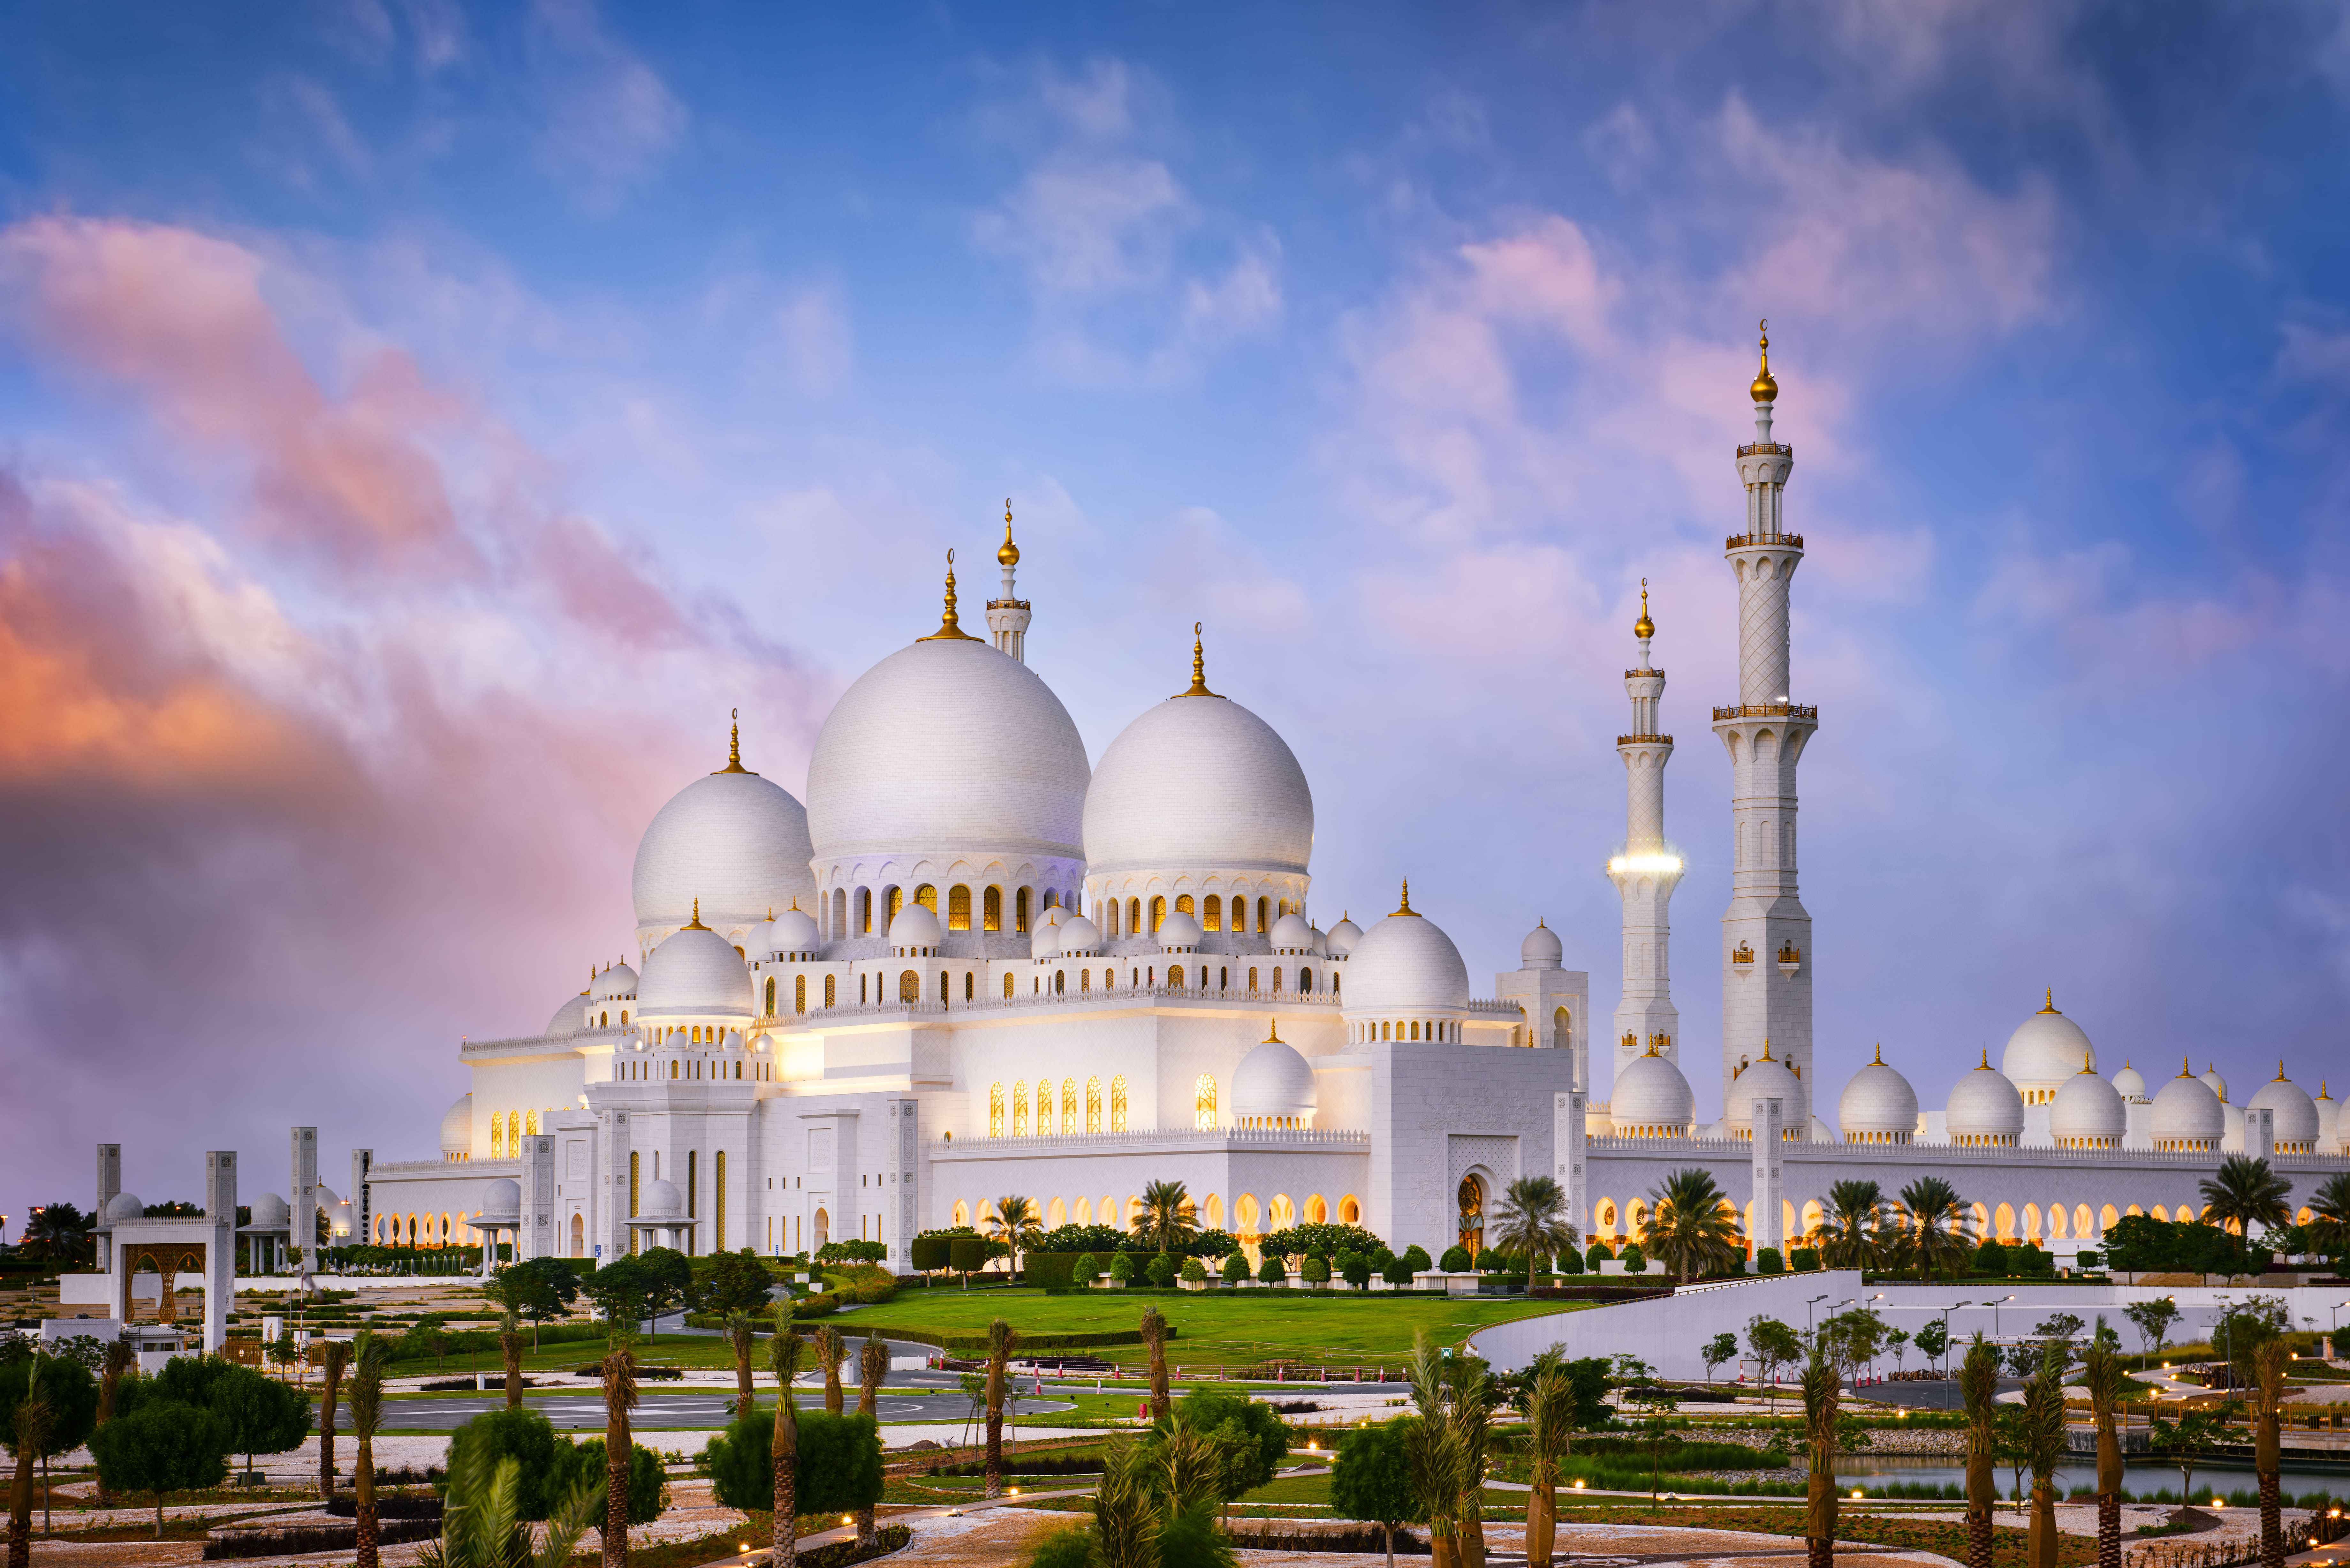 Abu Dhabi Sheikh Zayed Grand Mosque Tour In Half Day From Dubai - Travel Fube